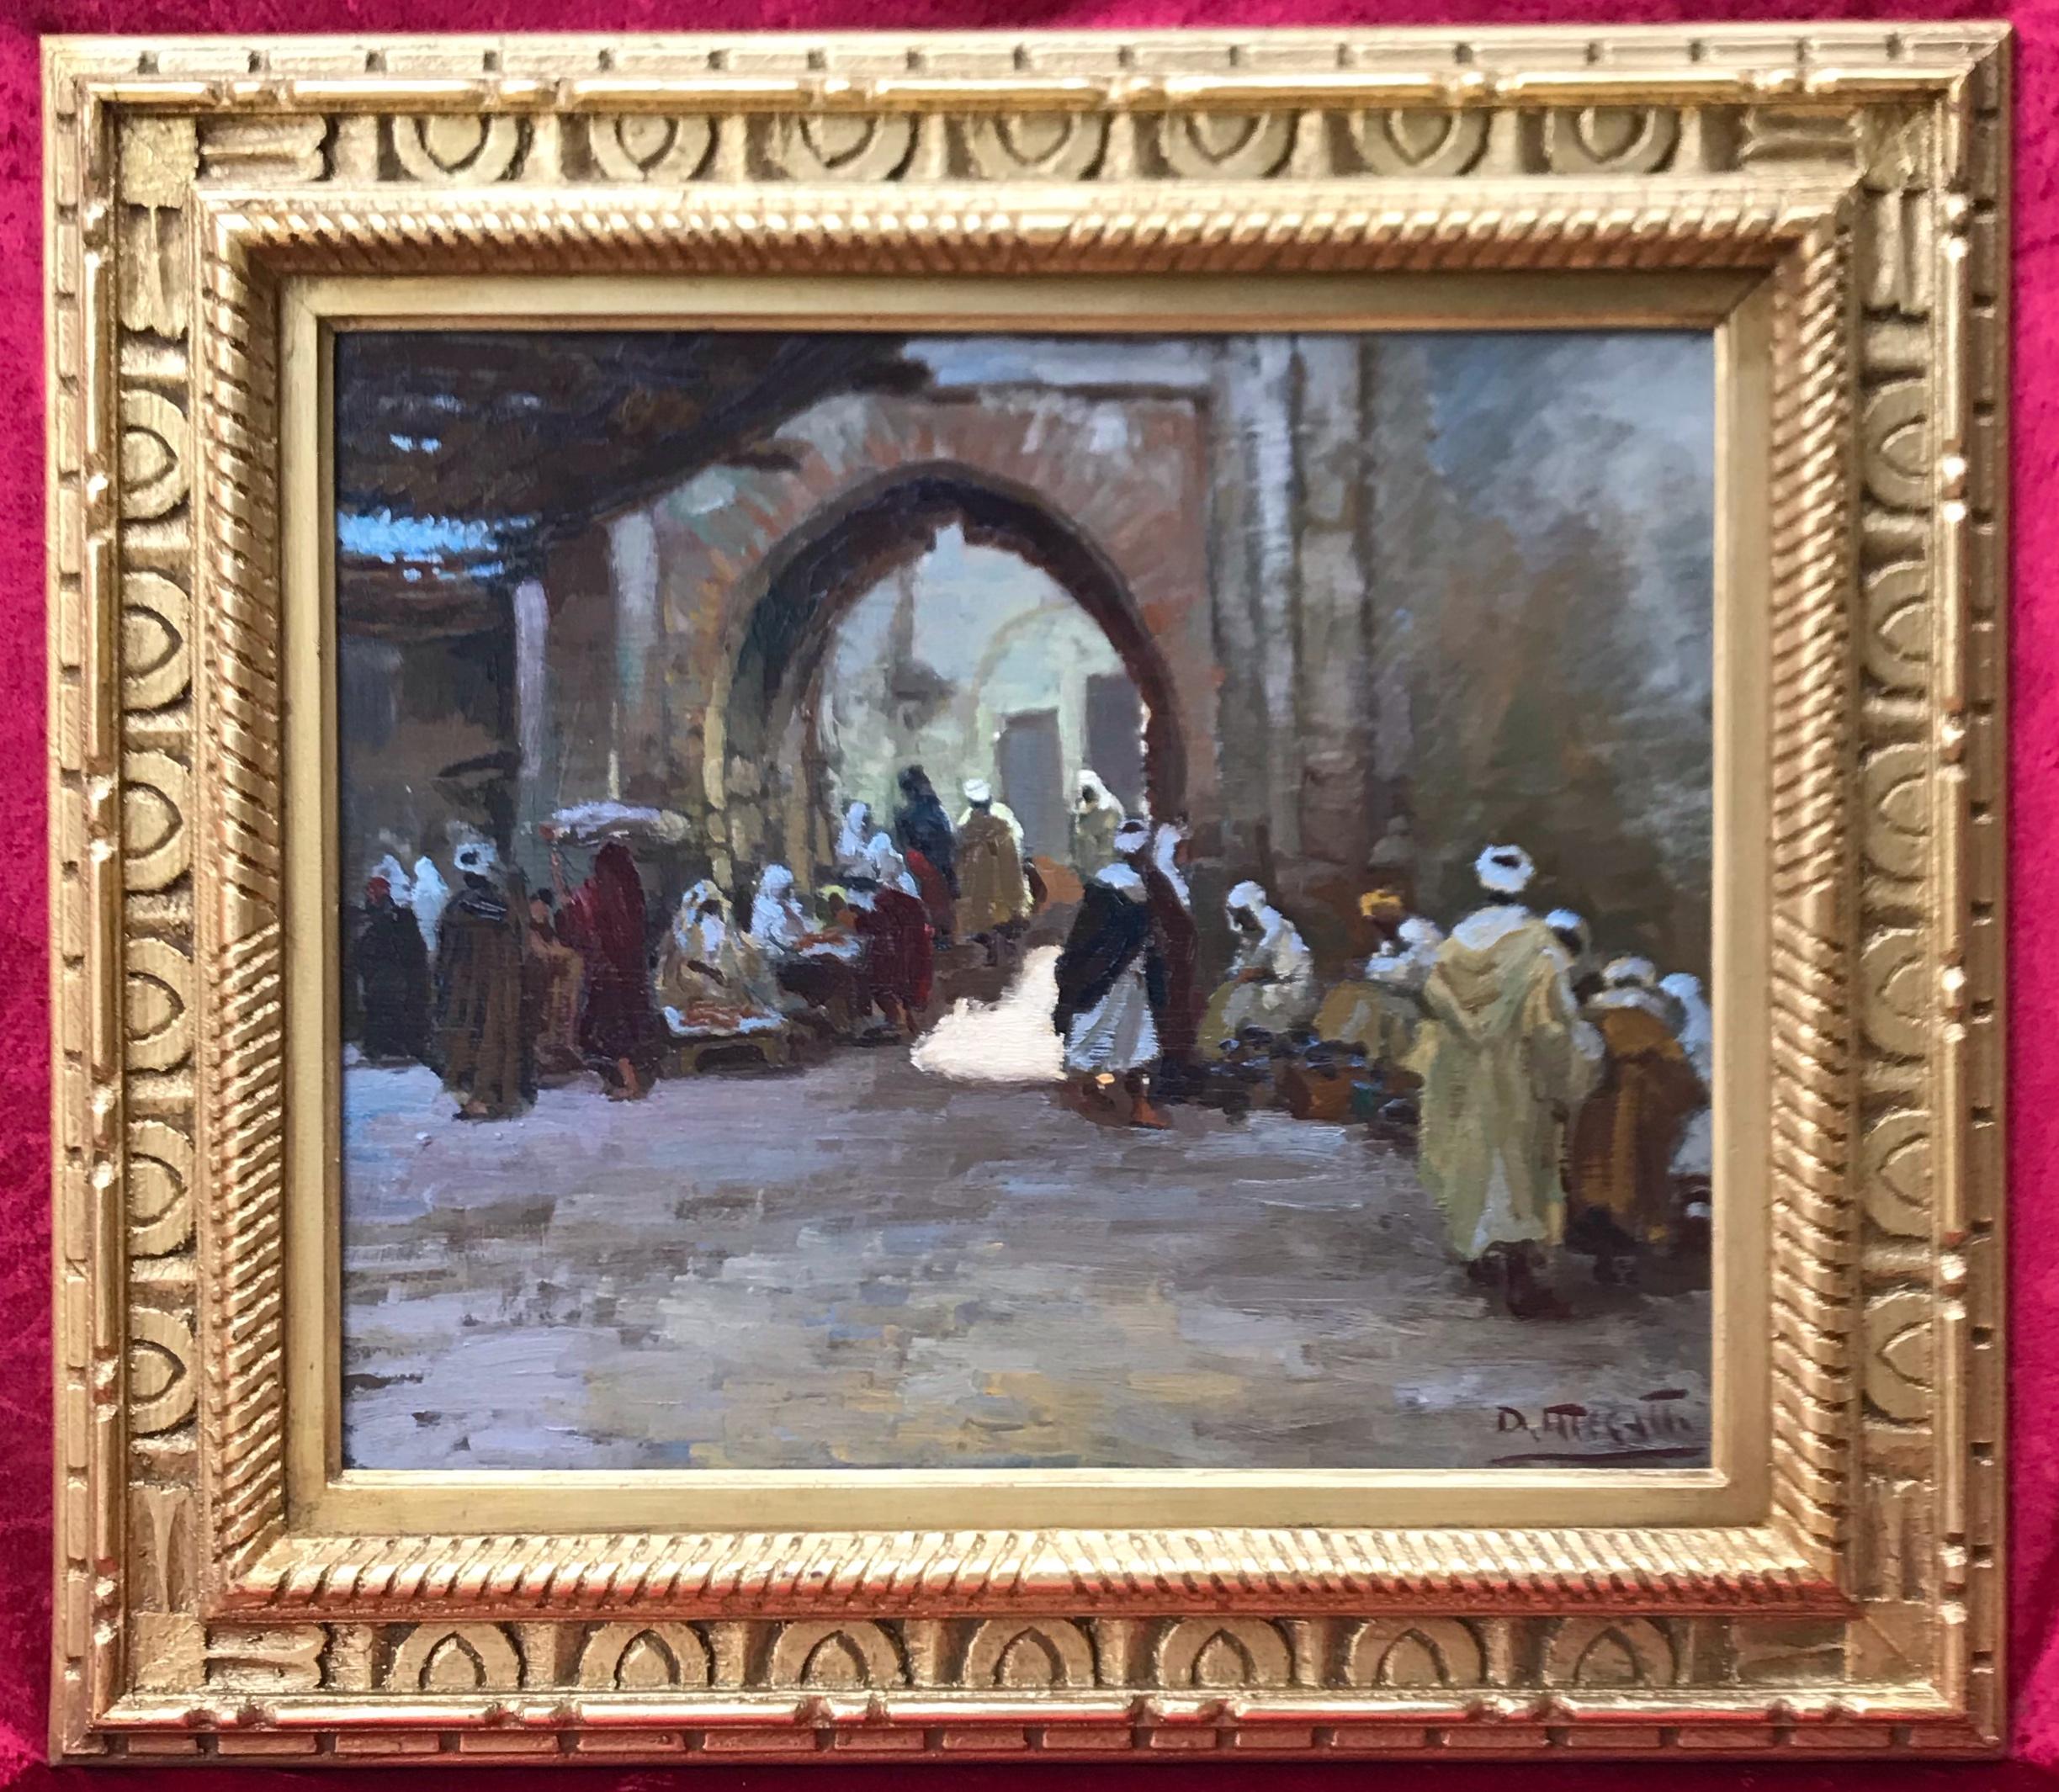 Dario MECATTI (1909 - 1976)
Orientalist Market Street
Oil on wood panel signed low right
Old frame re-gilded
Dim wood : 47 X 55 cm 

Dario MECATTI (1909 - 1976)
Brazilian painter born in Florence (Italy) 14 décember 1909.
Died in Sao Paulo (Brazil)